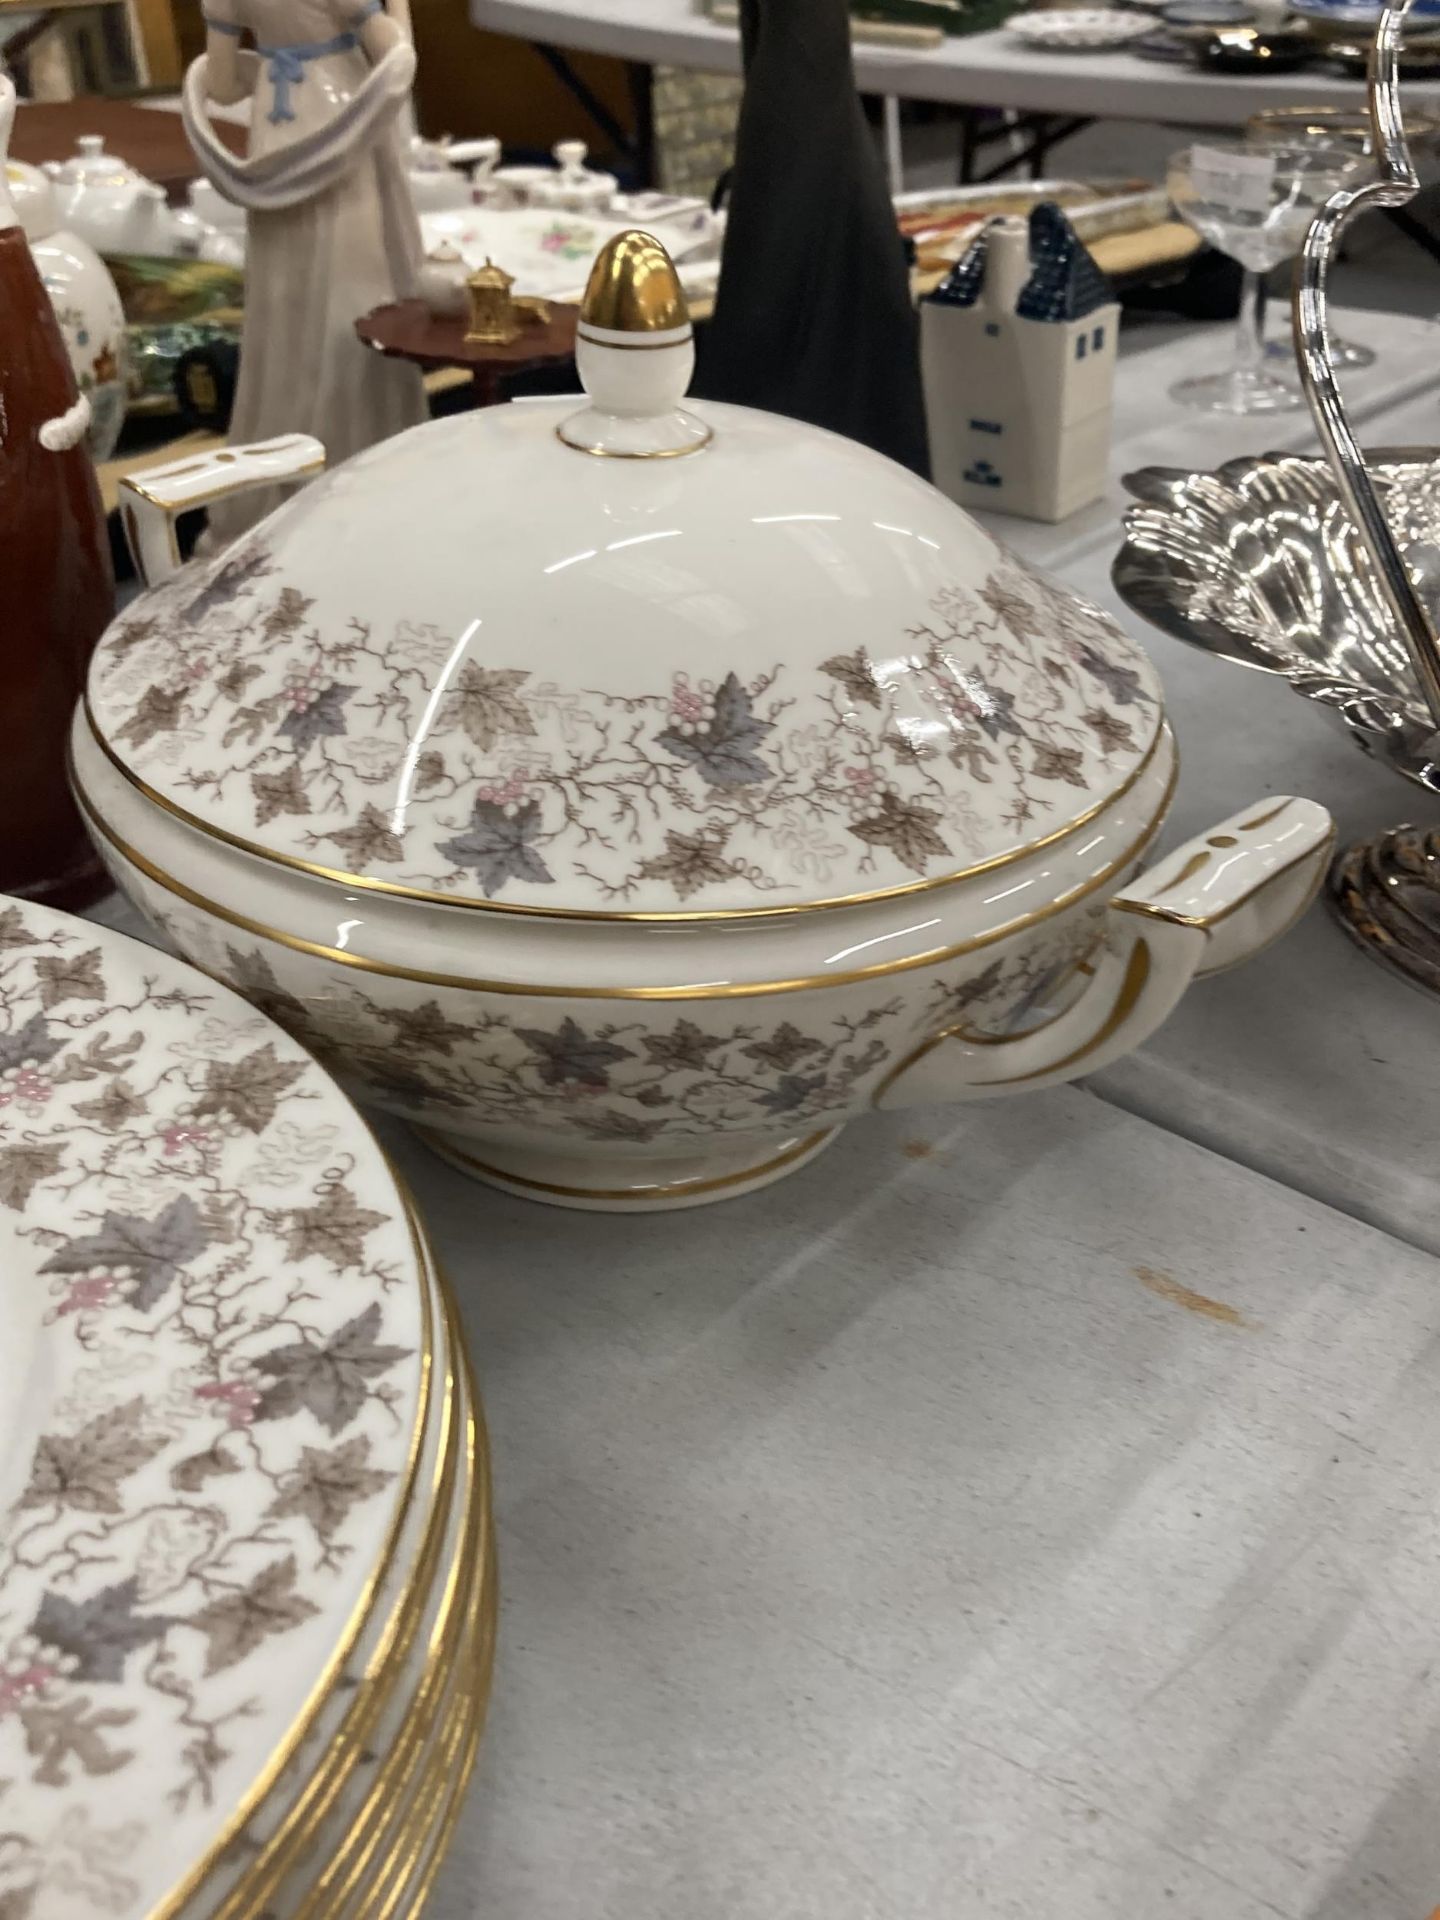 A QUANTITY OF VINTAGE MINTON PLATES, A SERVING TUREEN WITH LID, SAUCE BOAT, ETC - Image 3 of 4